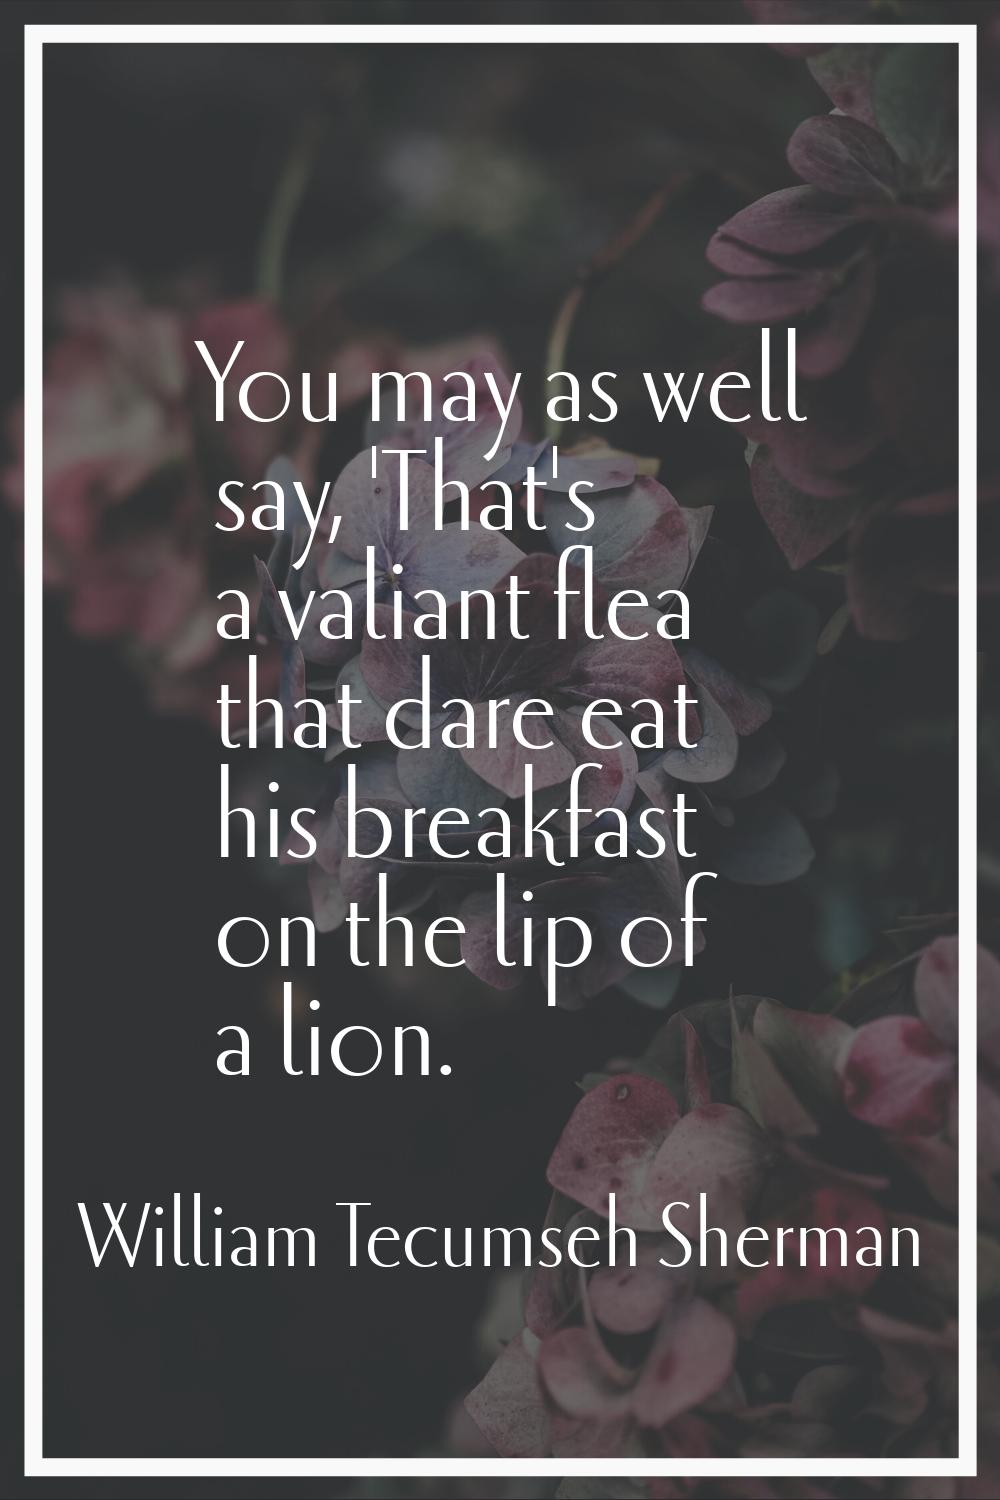 You may as well say, 'That's a valiant flea that dare eat his breakfast on the lip of a lion.